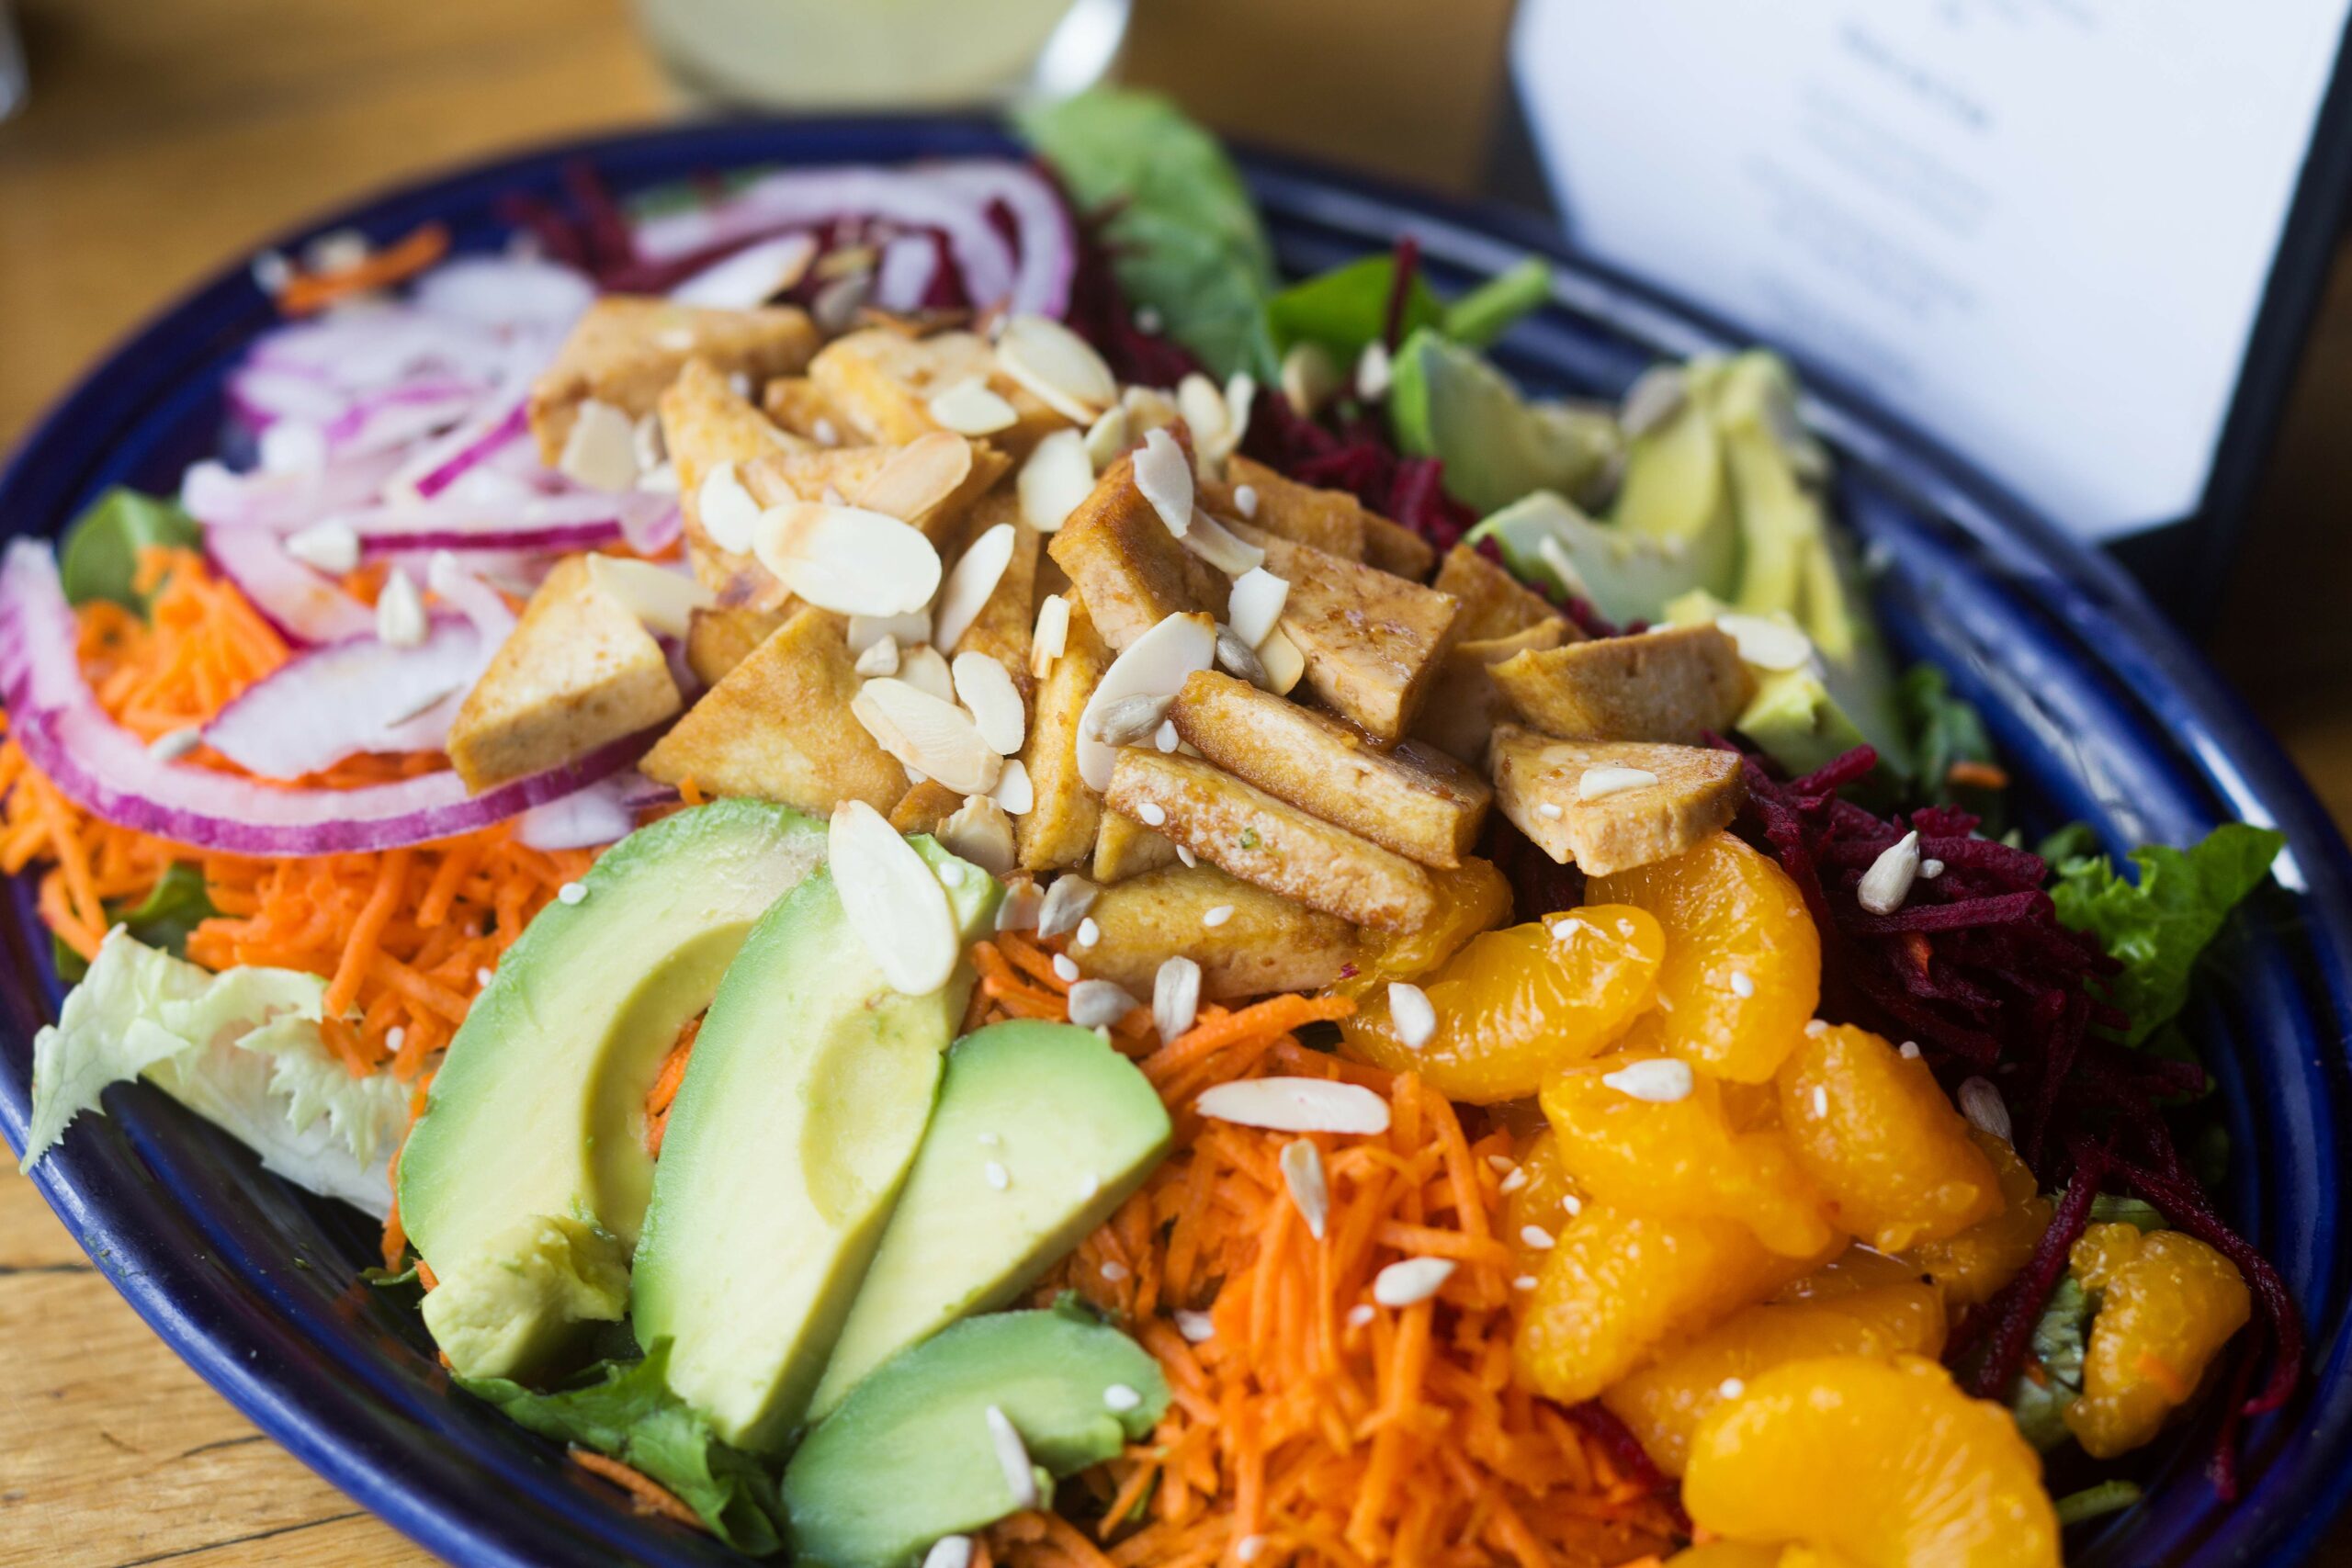 The Thai Tofu Salad from East West Cafe in Santa Rosa. (Charlie Gesell/The Press Democrat)